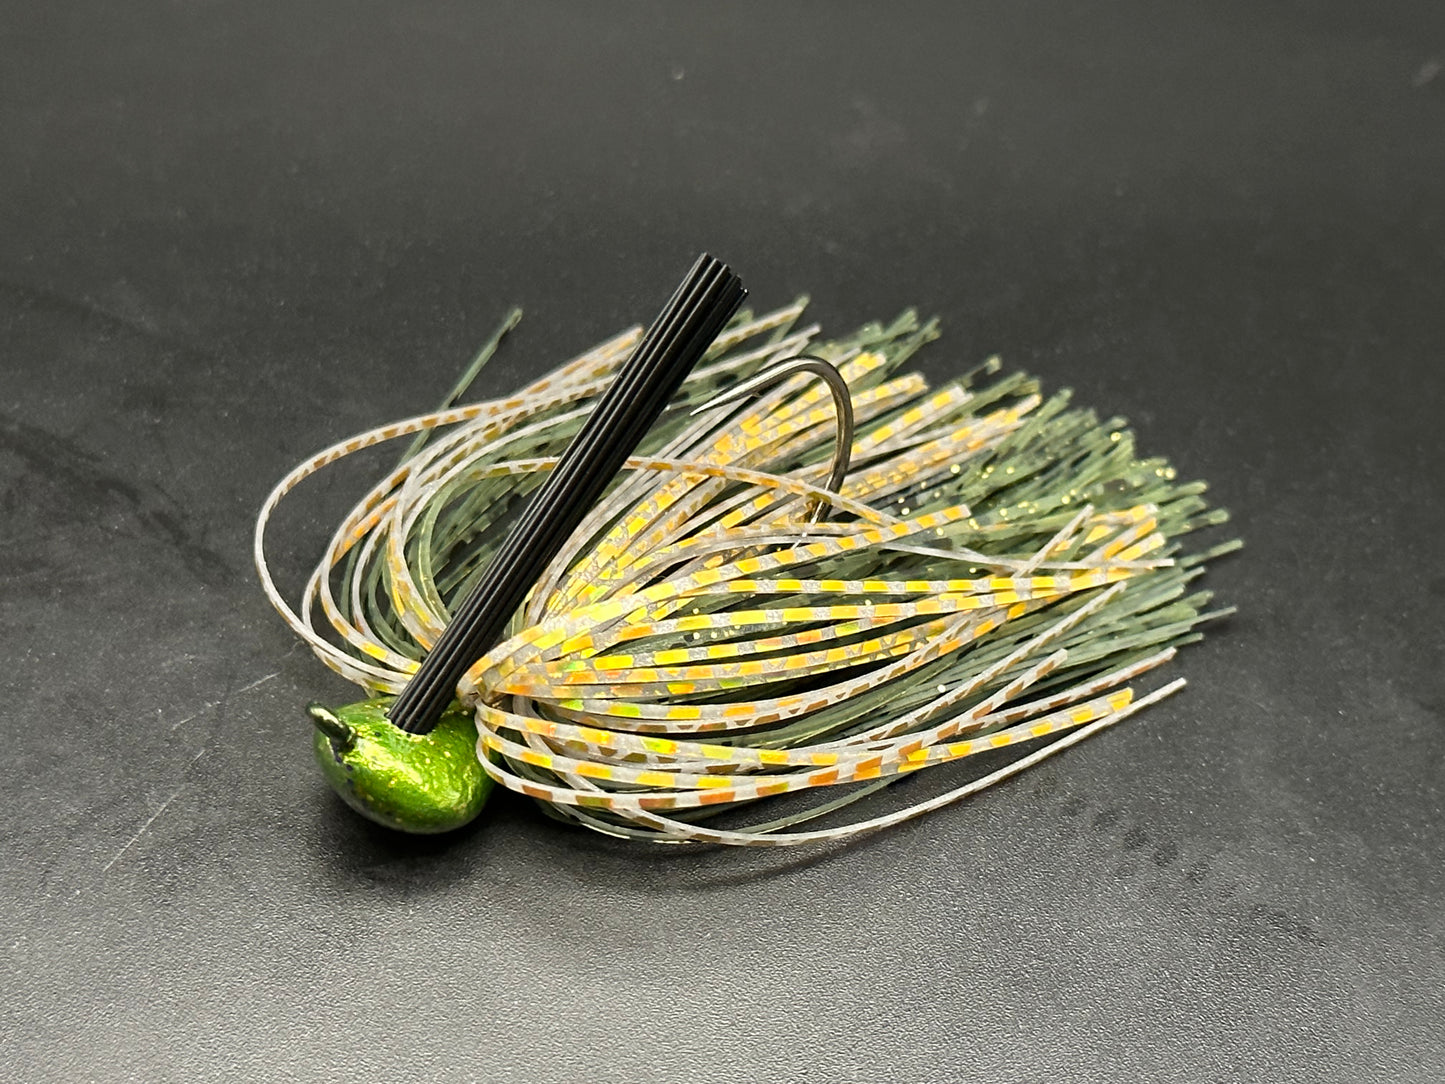 Arky Style Jig - 1 Jig wire tied by hand